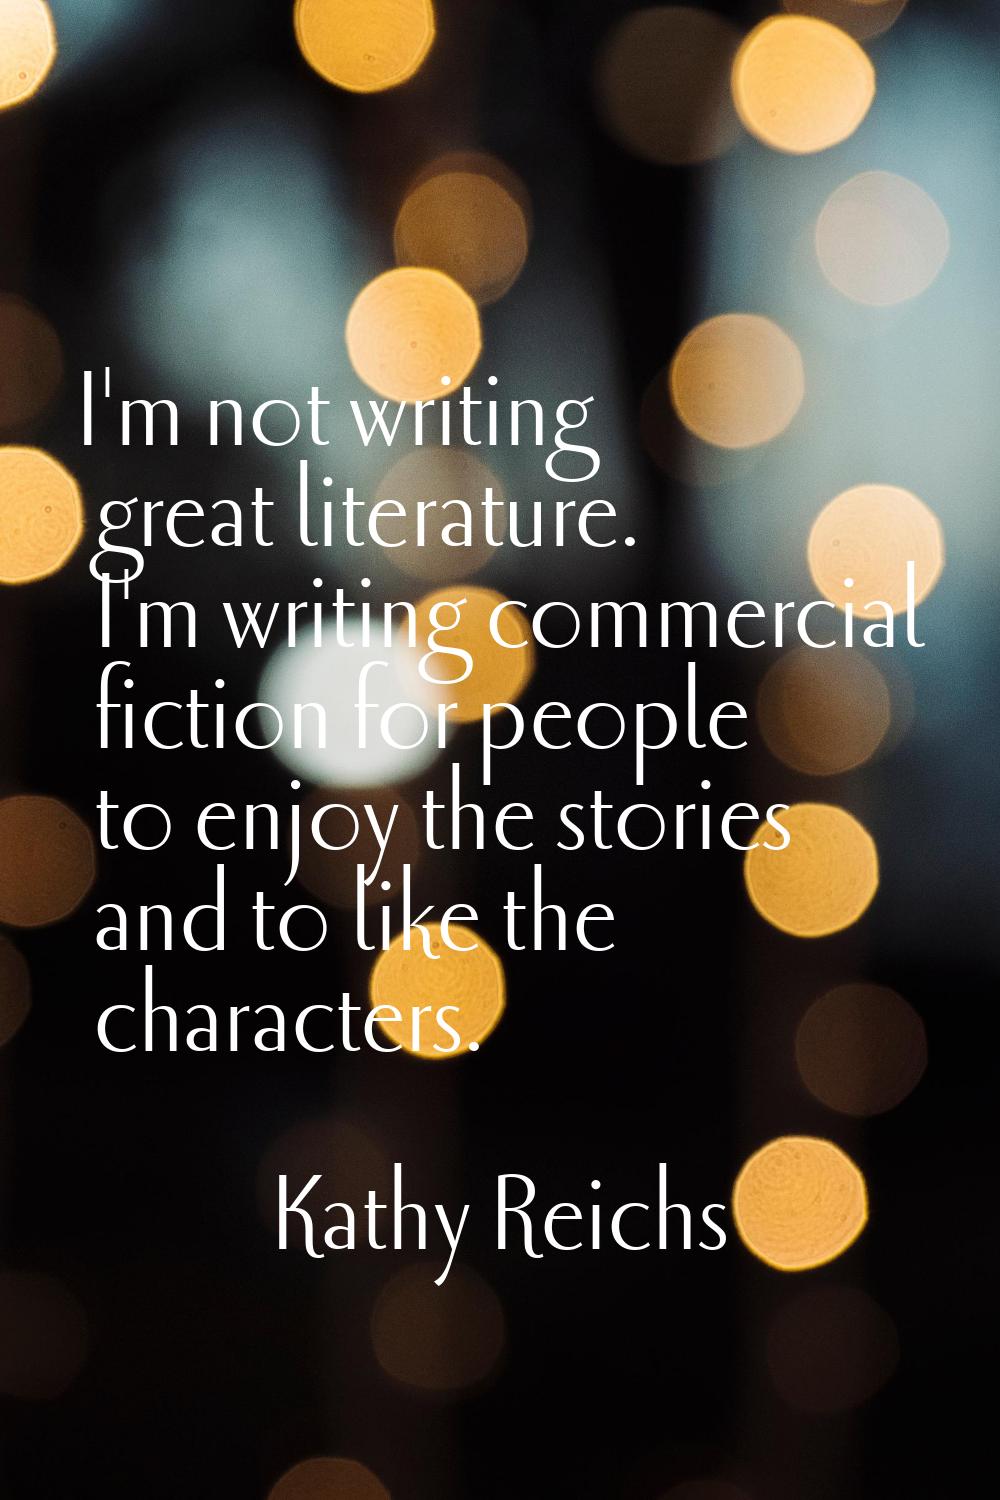 I'm not writing great literature. I'm writing commercial fiction for people to enjoy the stories an